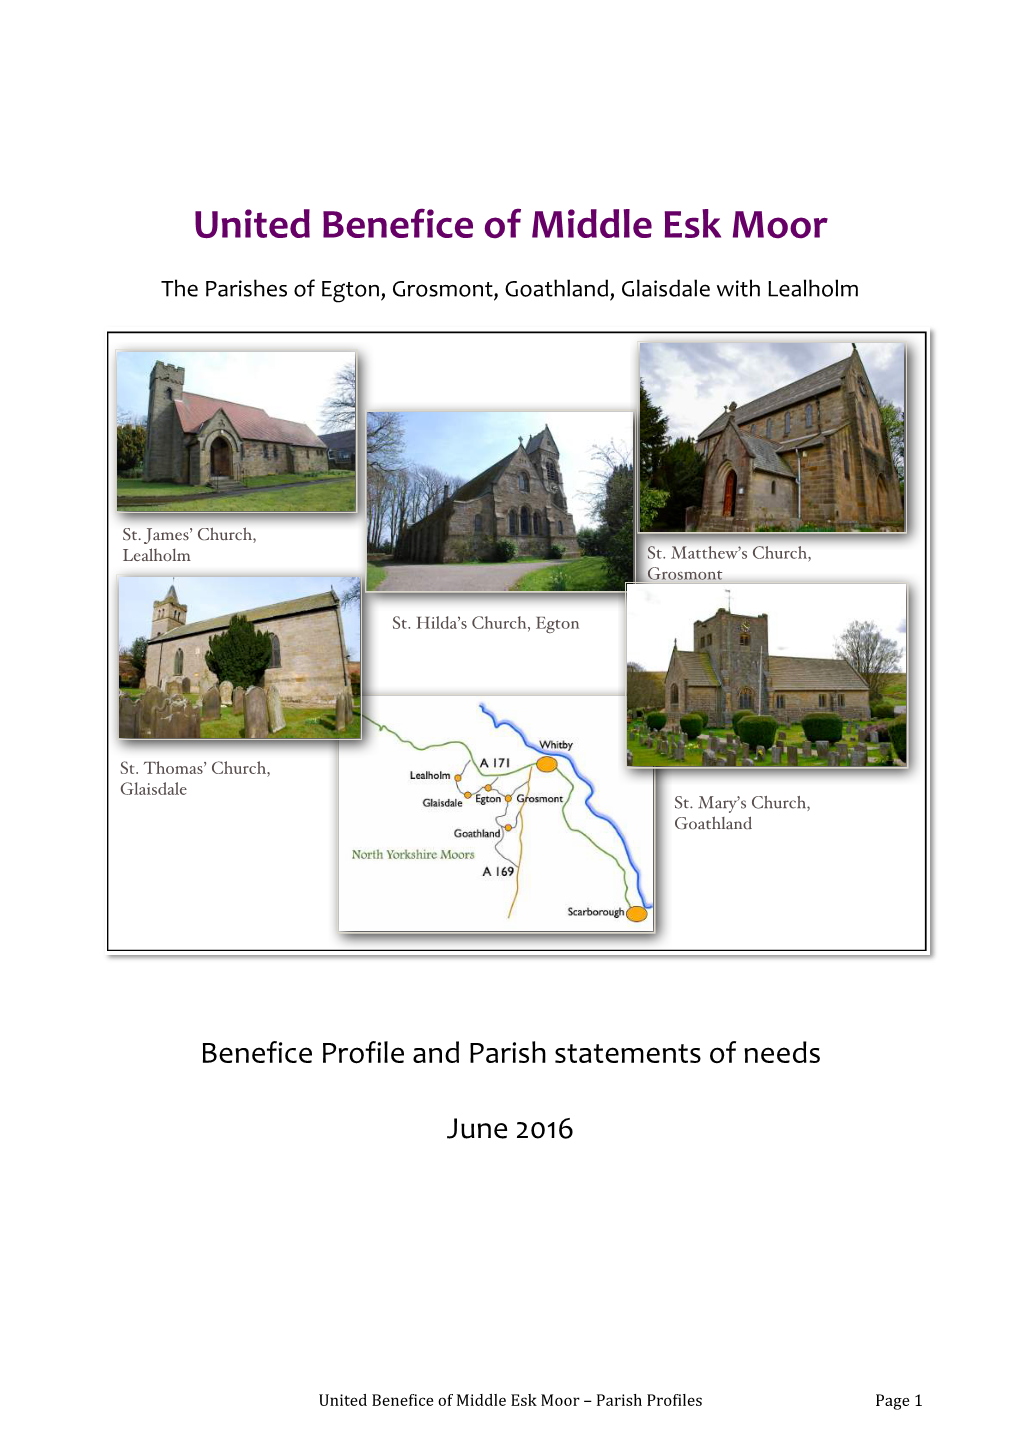 United Benefice of Middle Esk Moor